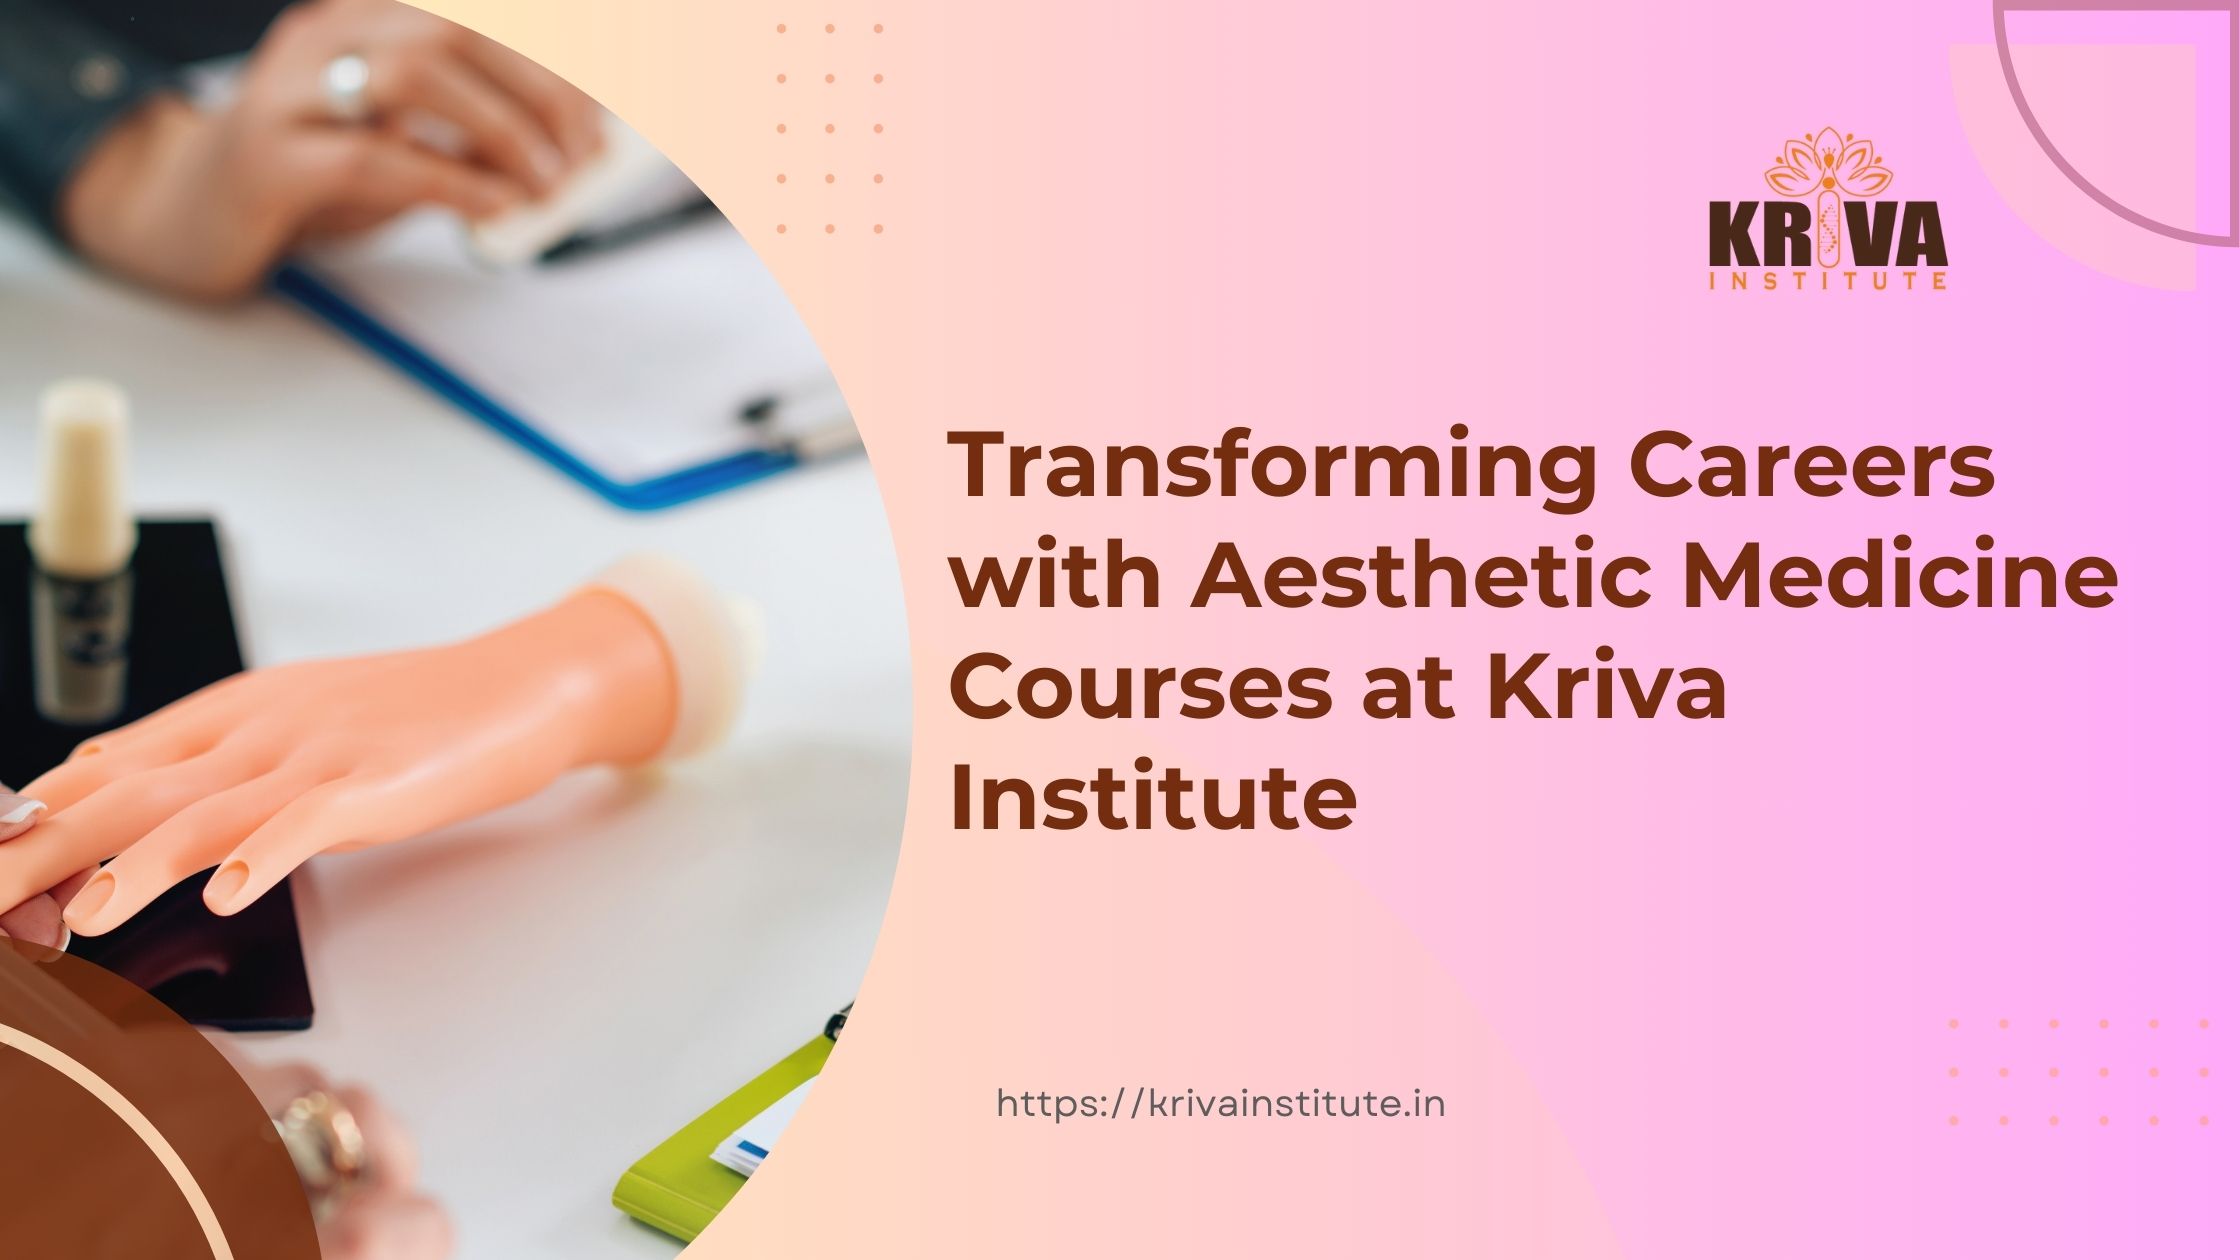 Transforming Careers with Aesthetic Medicine Courses at Kriva Institute